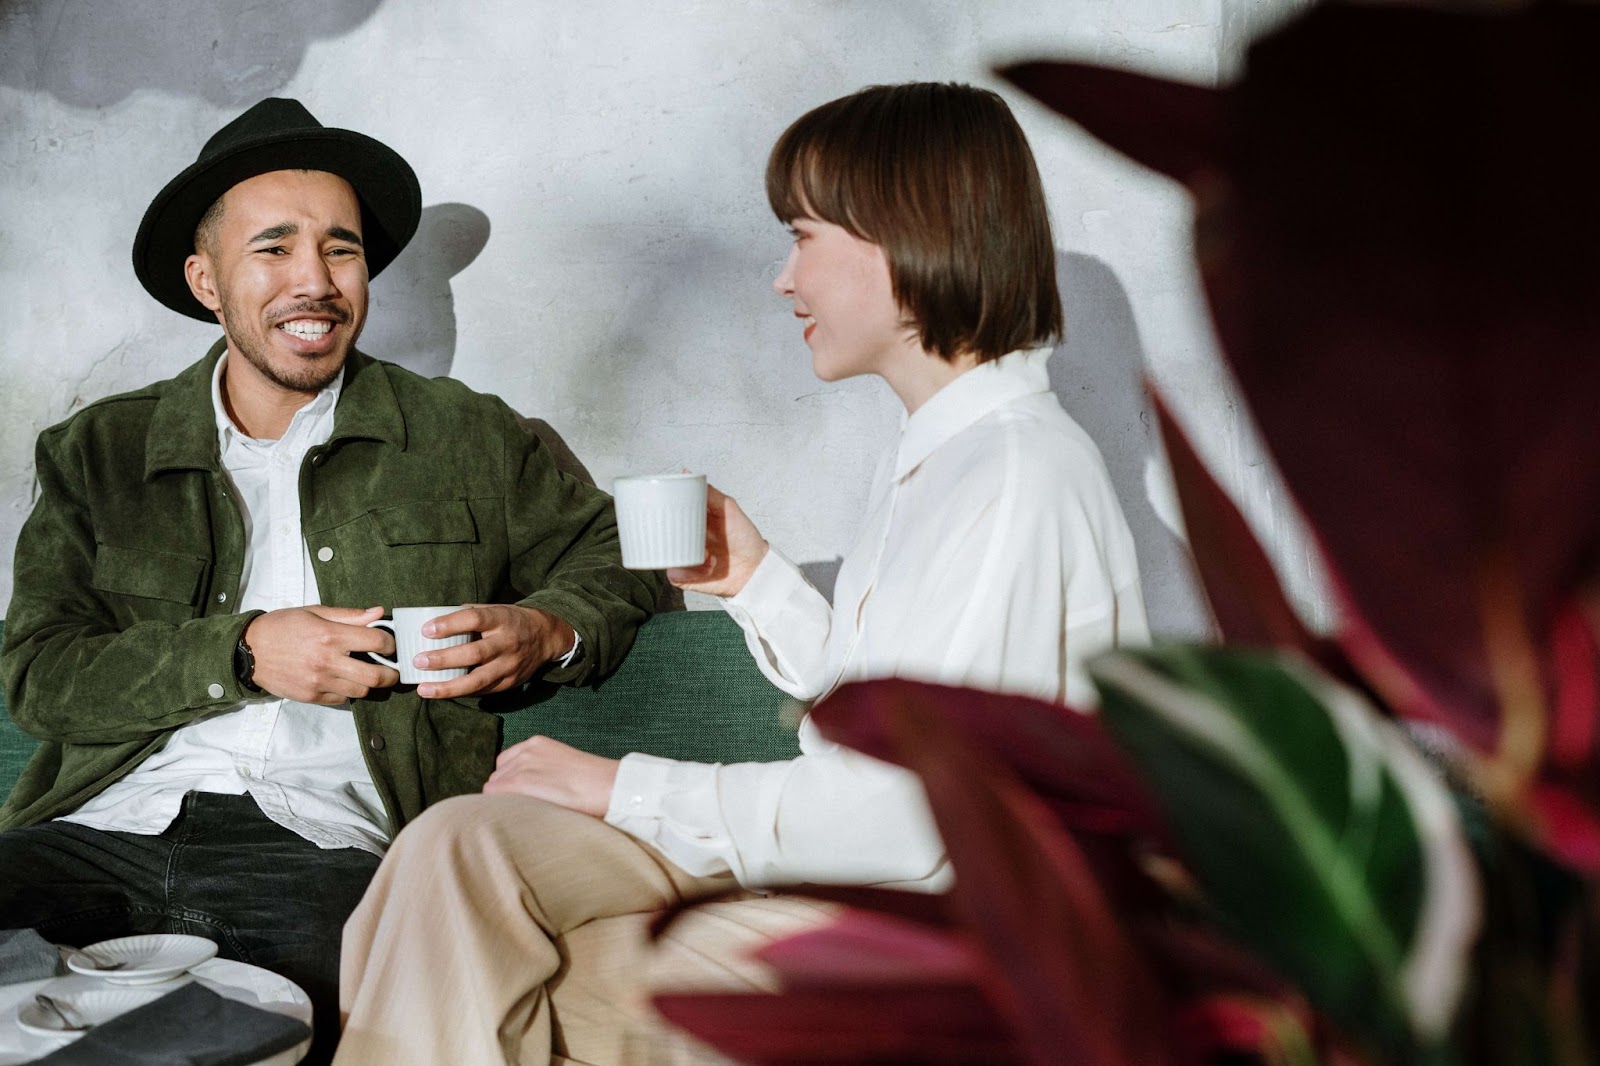 man and woman holding coffee cups and smiling